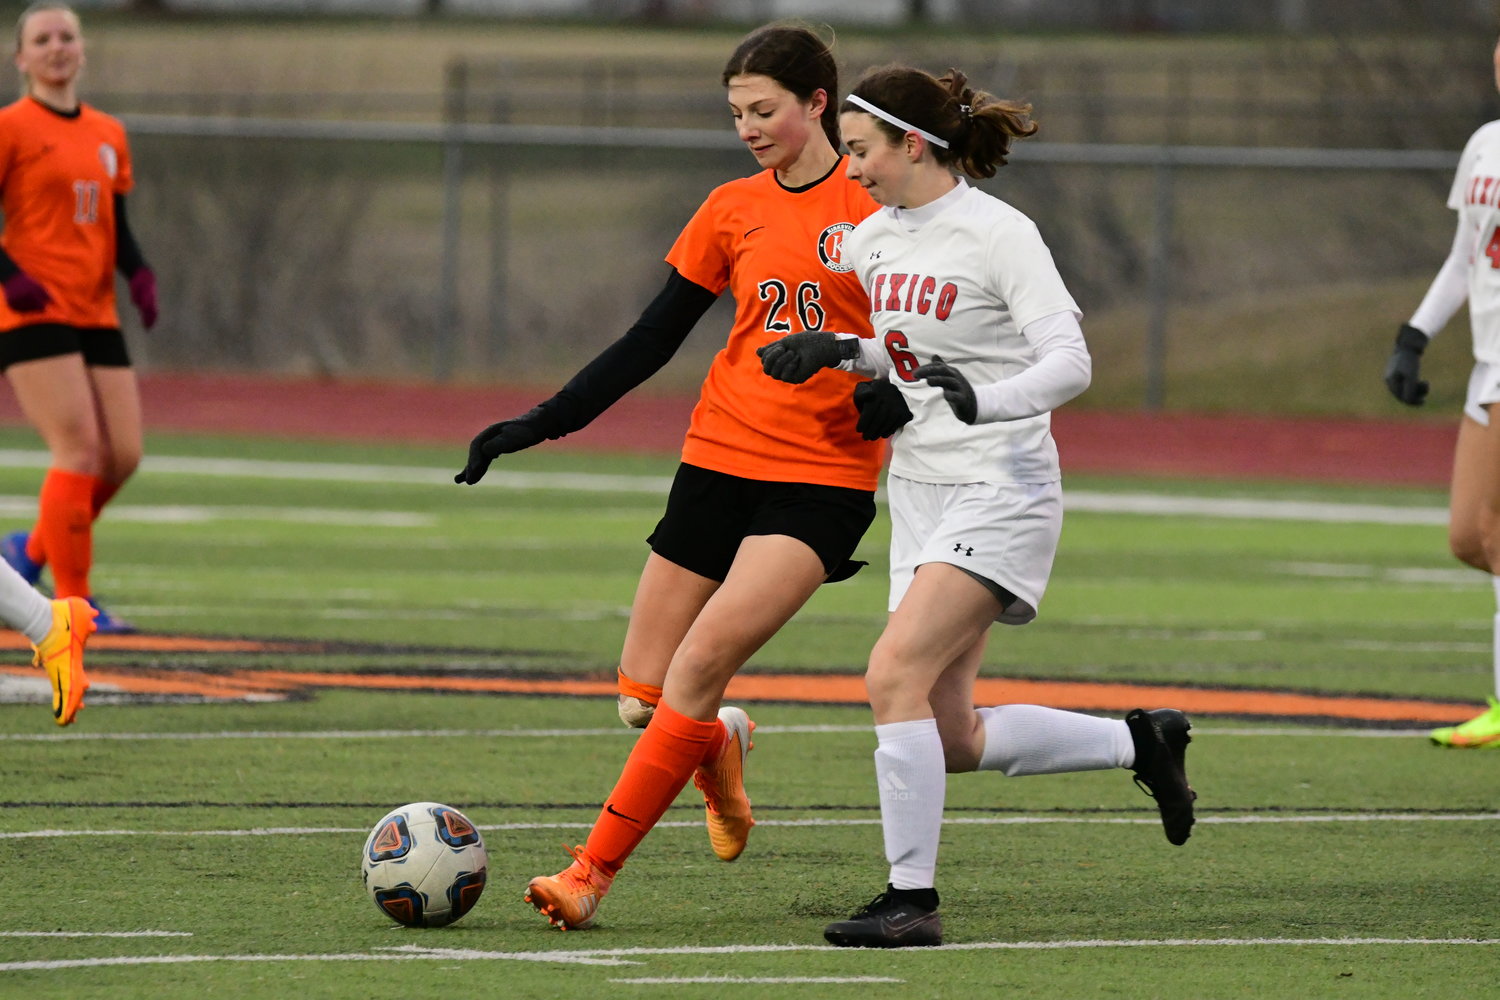 Photos from Wednesday’s 8-0 win for the Kirksville girls soccer team against Mexico.